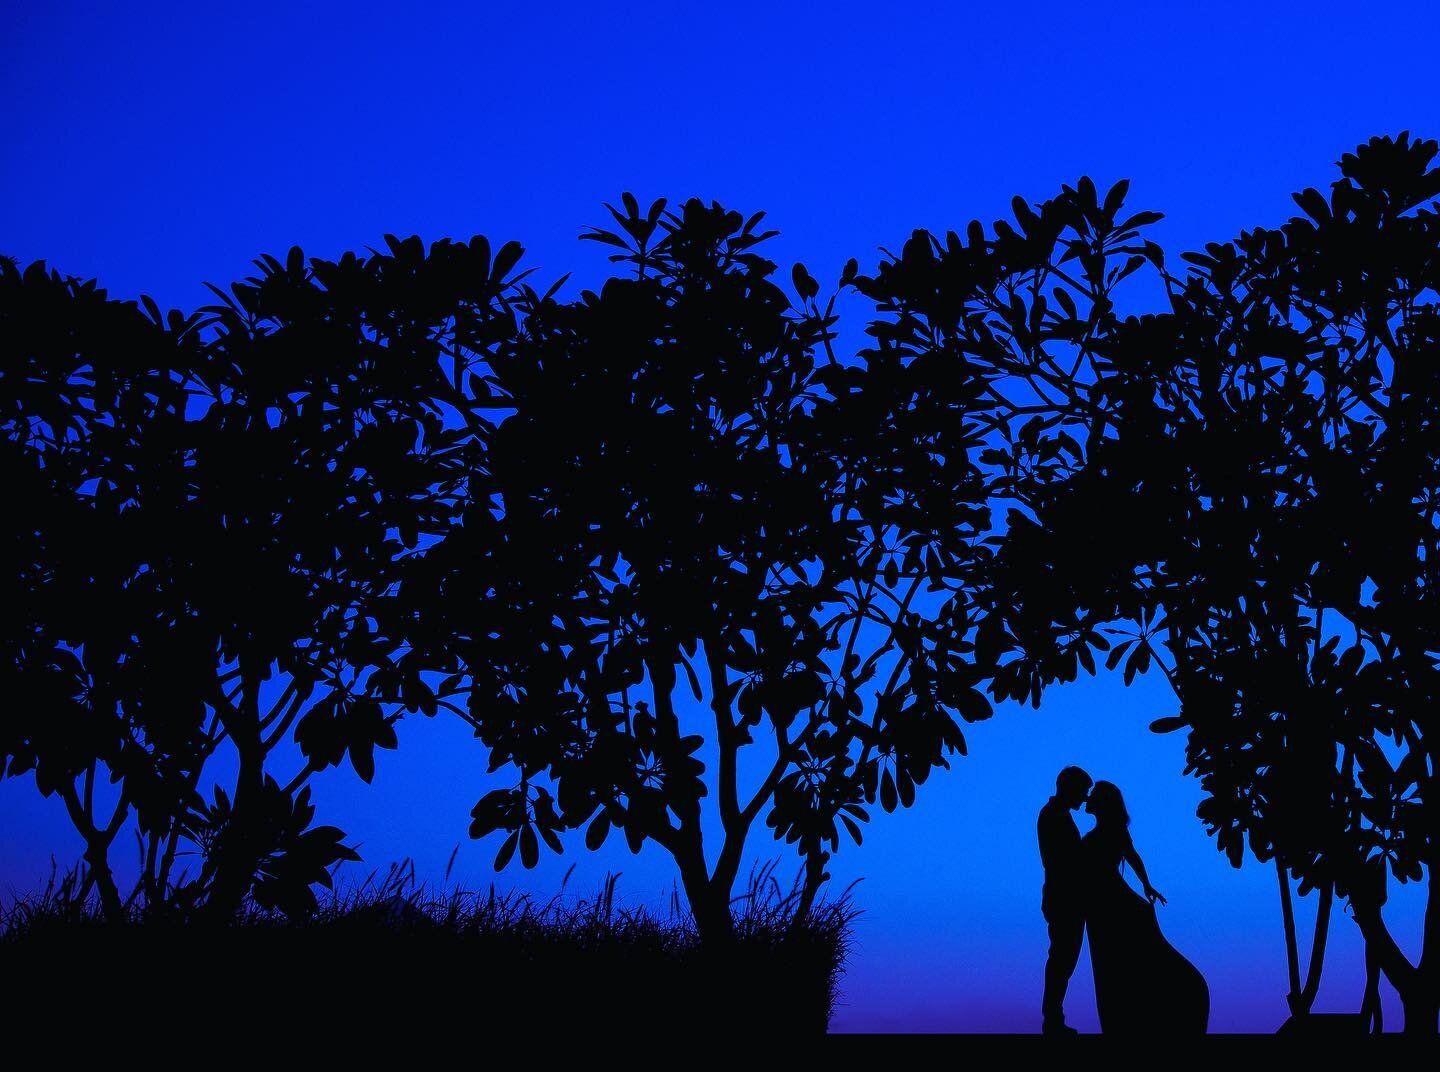 I&rsquo;m always looking to make pictures that are a little different and interesting. Here&rsquo;s a silhouette of Niralie and Vimal created at sunset on the grounds of the majestic Devighar in Udaipur, India. Again, it was a pleasure to work alongs